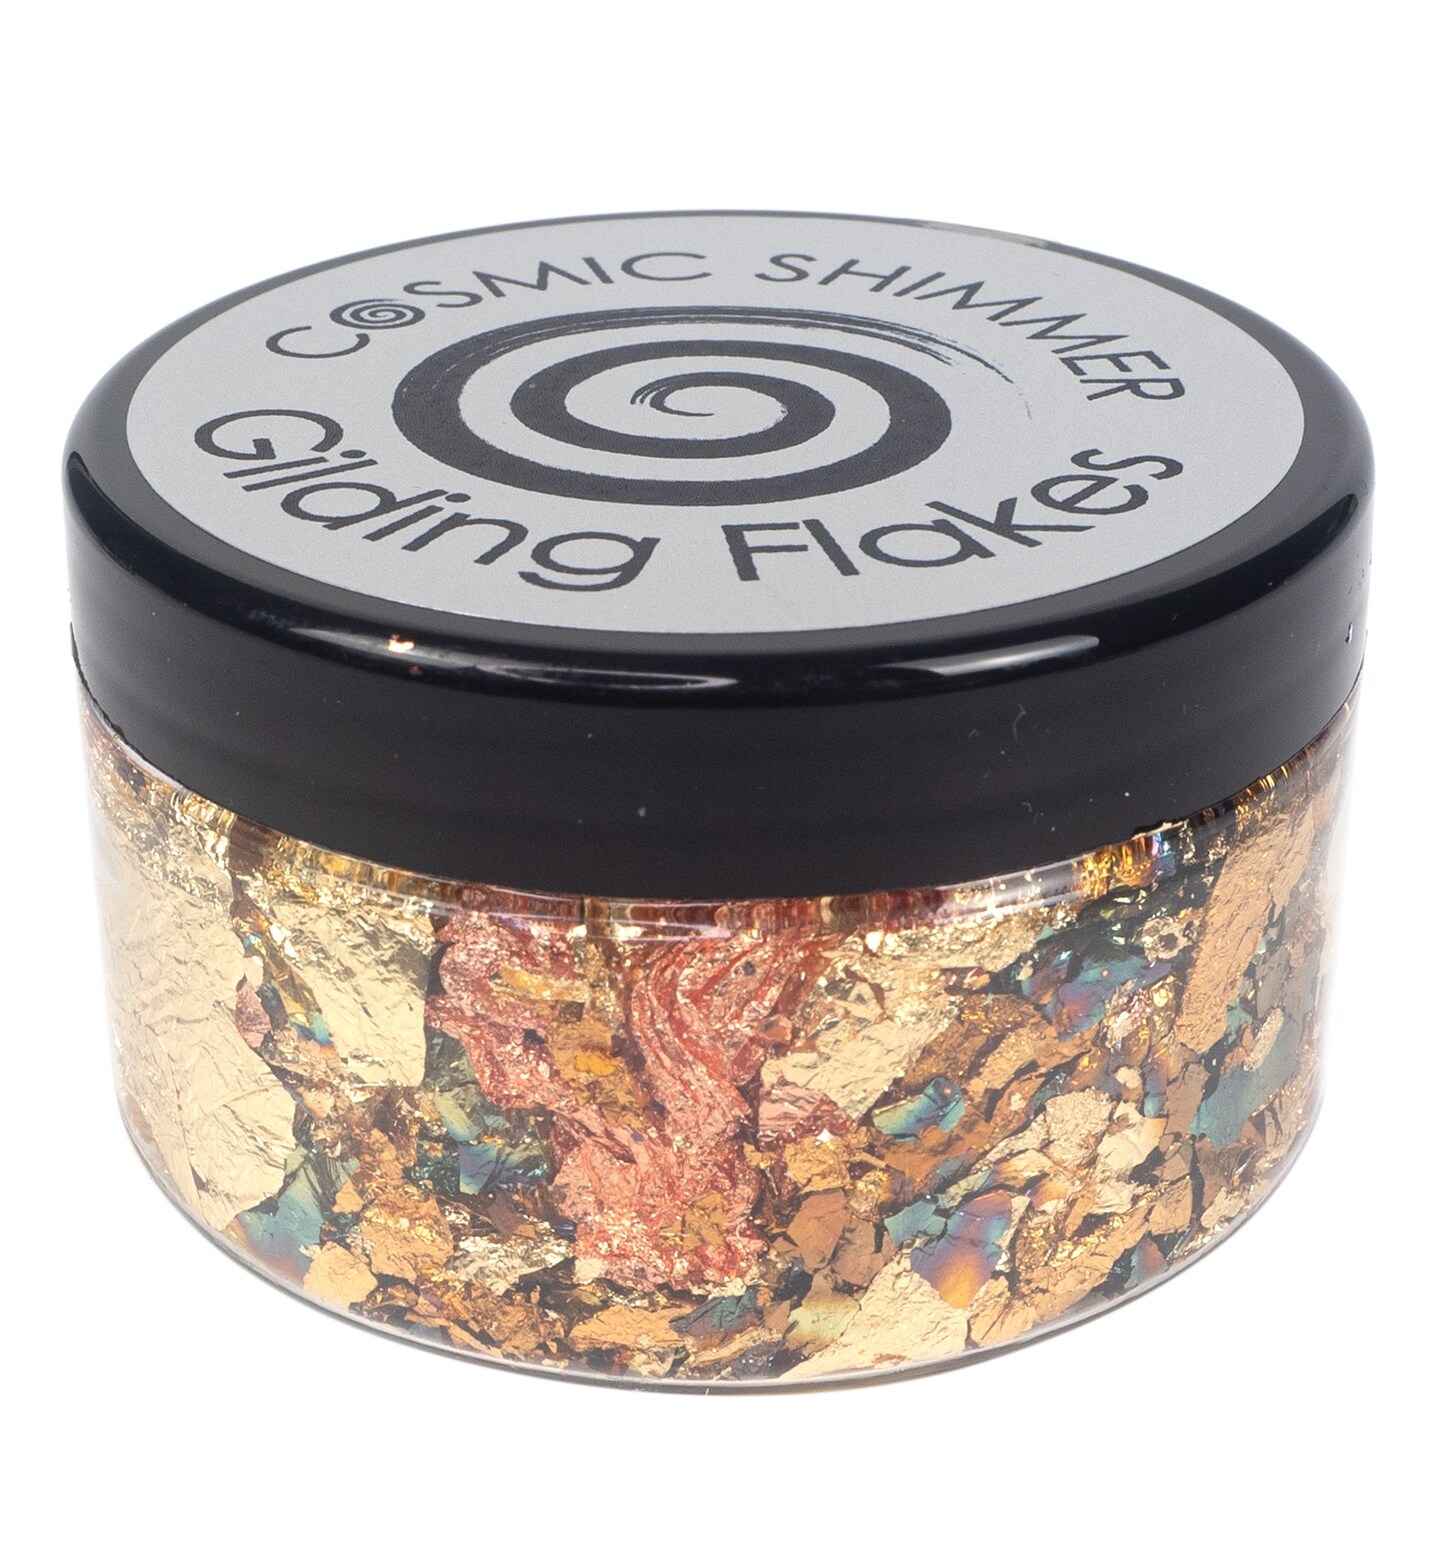 Creative Expressions Cosmic Shimmer Gilding Flakes 100ml-Copper Teal